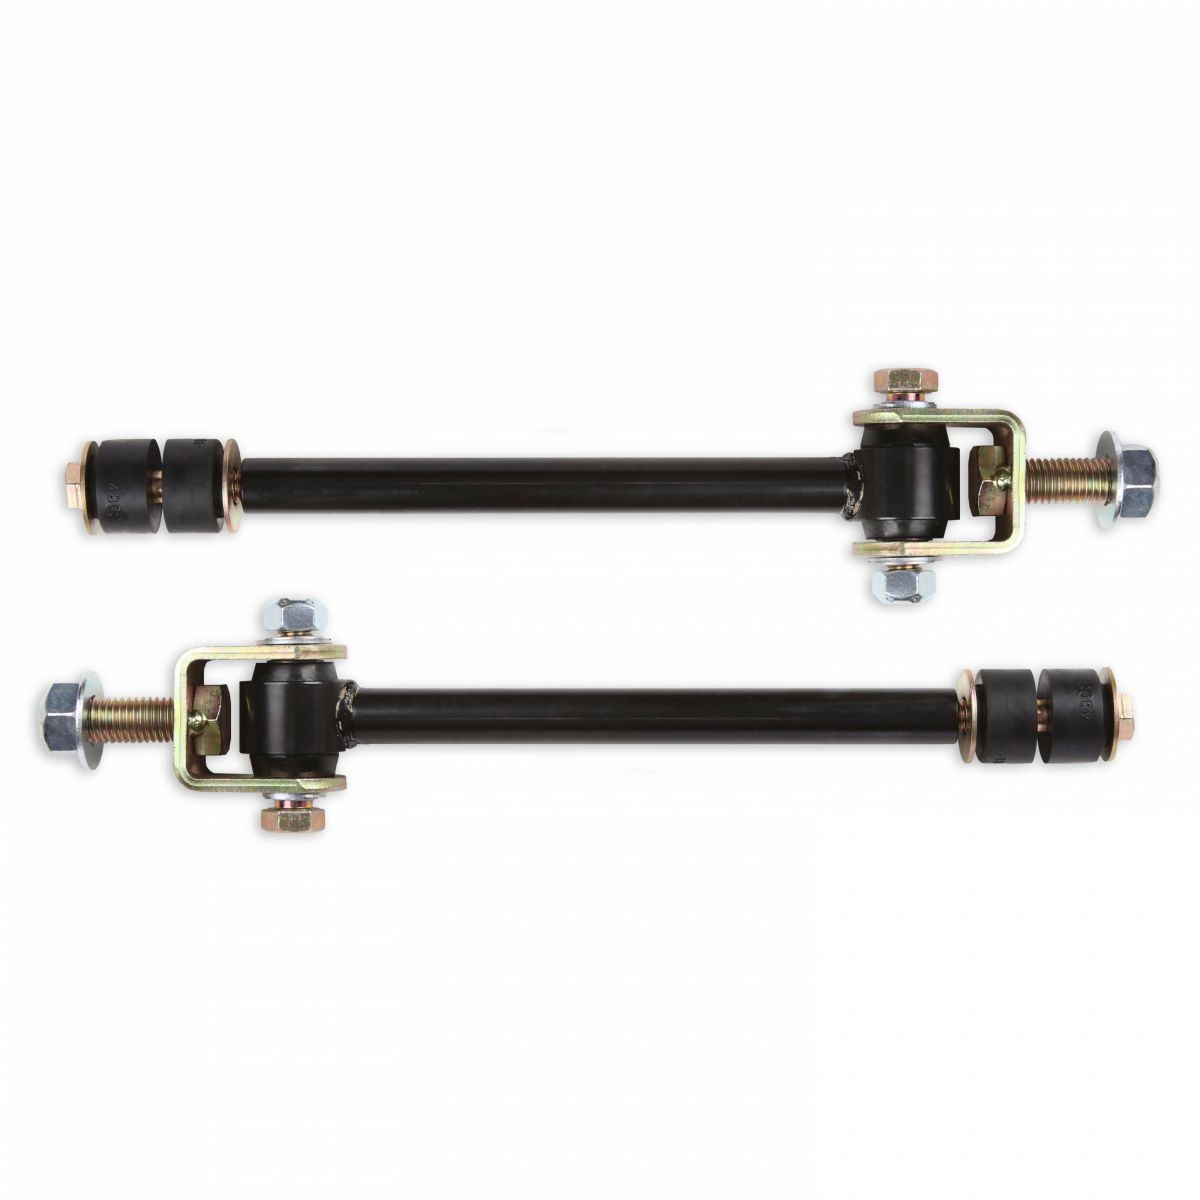 Cognito Motorsports - Cognito Front Sway Bar End Link Kit for 4/6-Inch Lifts on 01-19 2500/3500